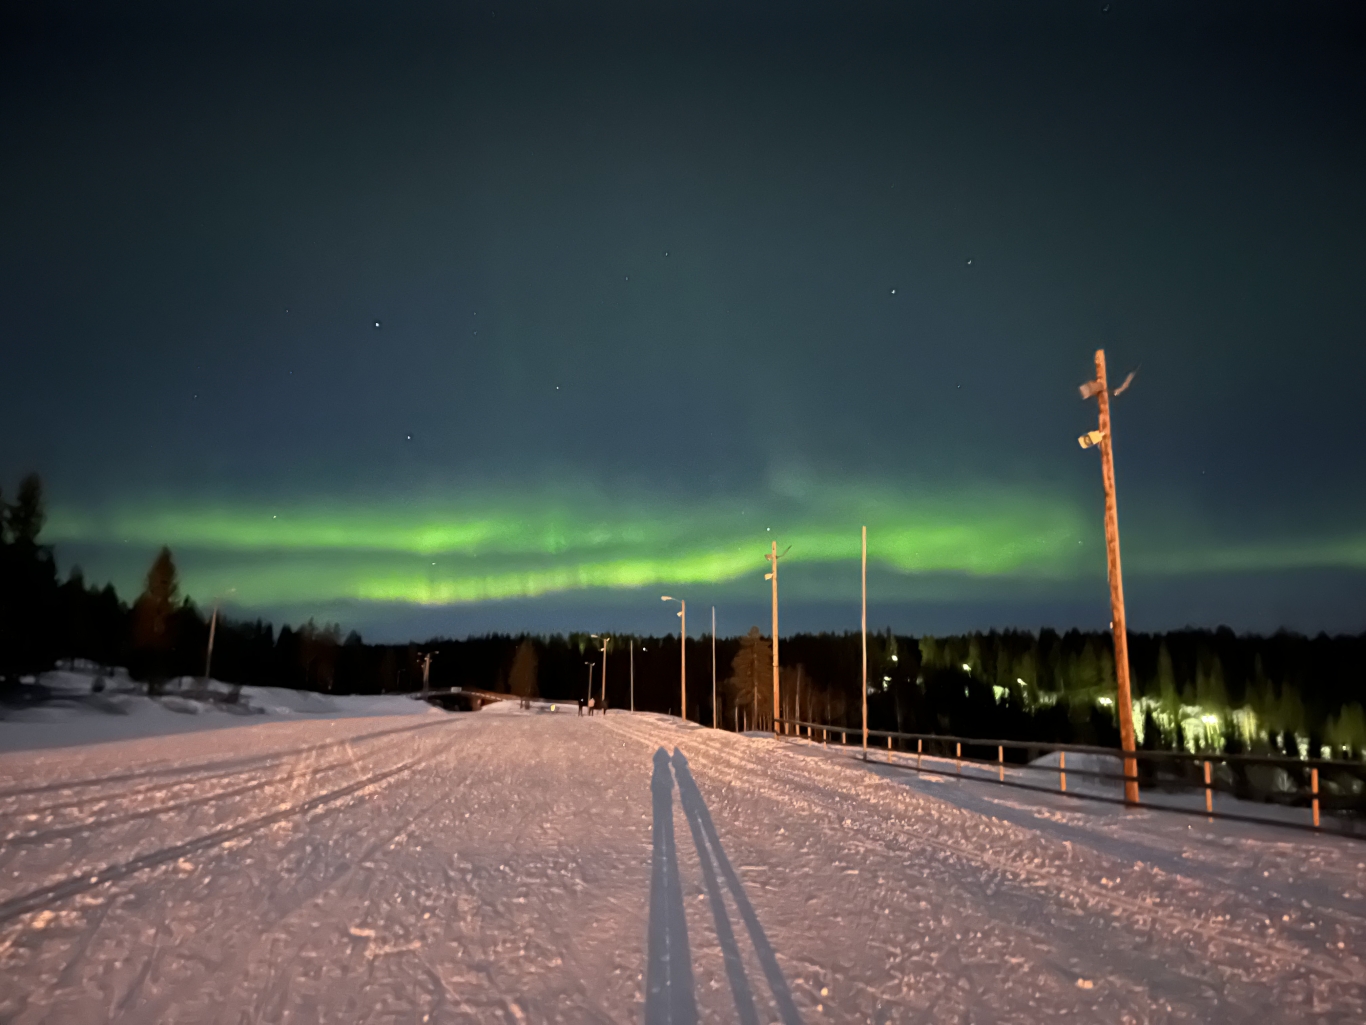 Say Hello to the Northern Lights